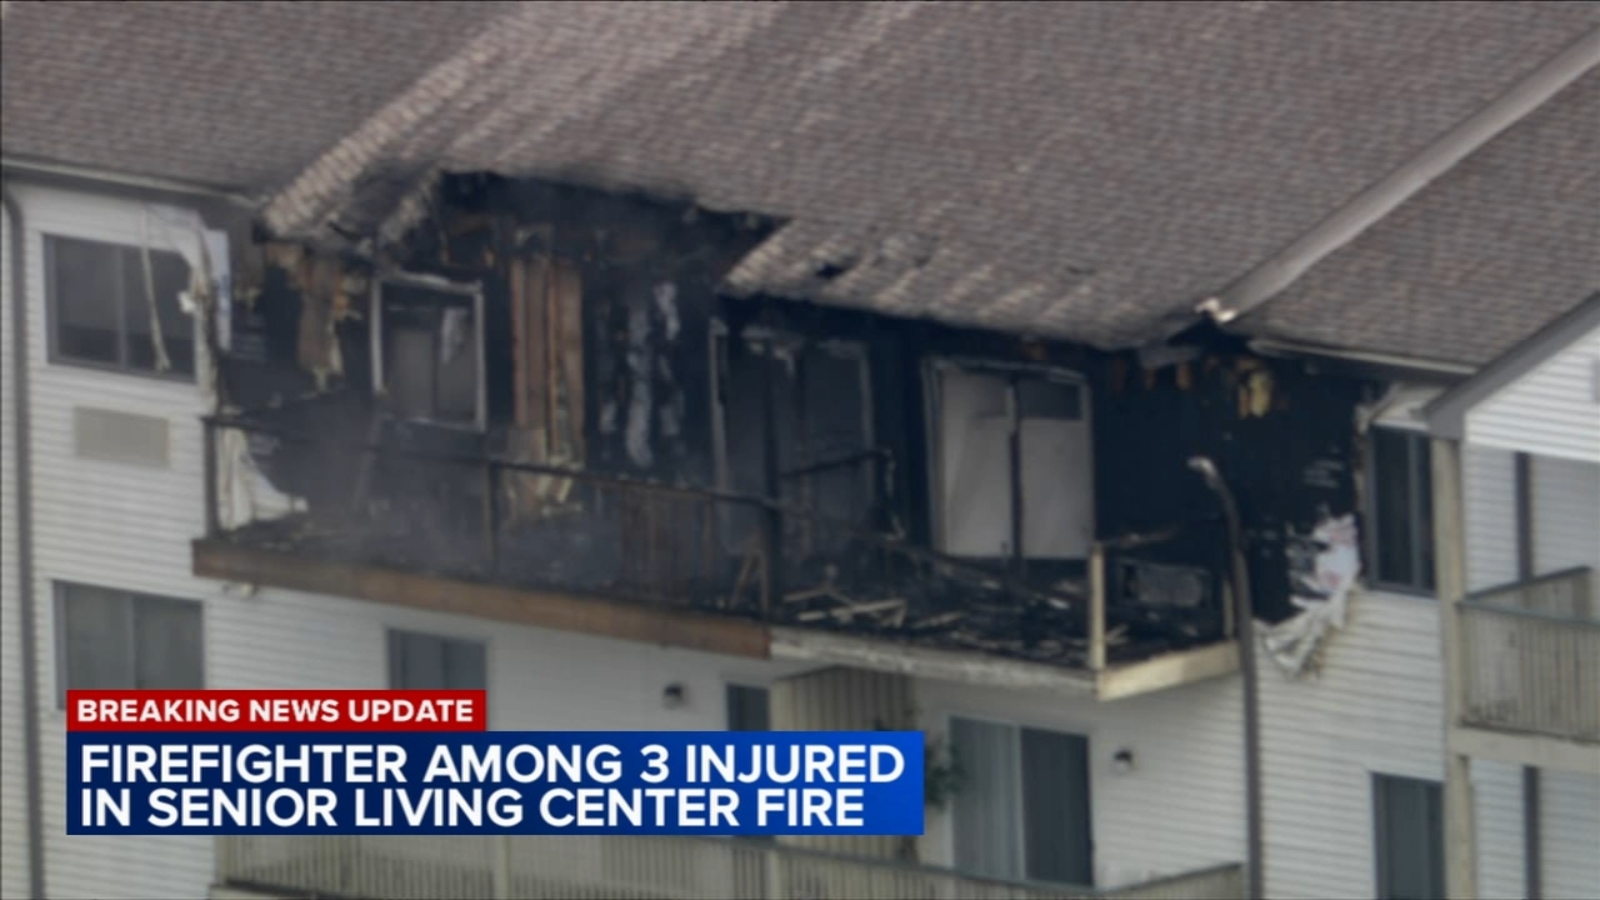 Schaumburg fire today: Firefighters, police officers among 6 people hospitalized after fire at West Wise Road senior housing